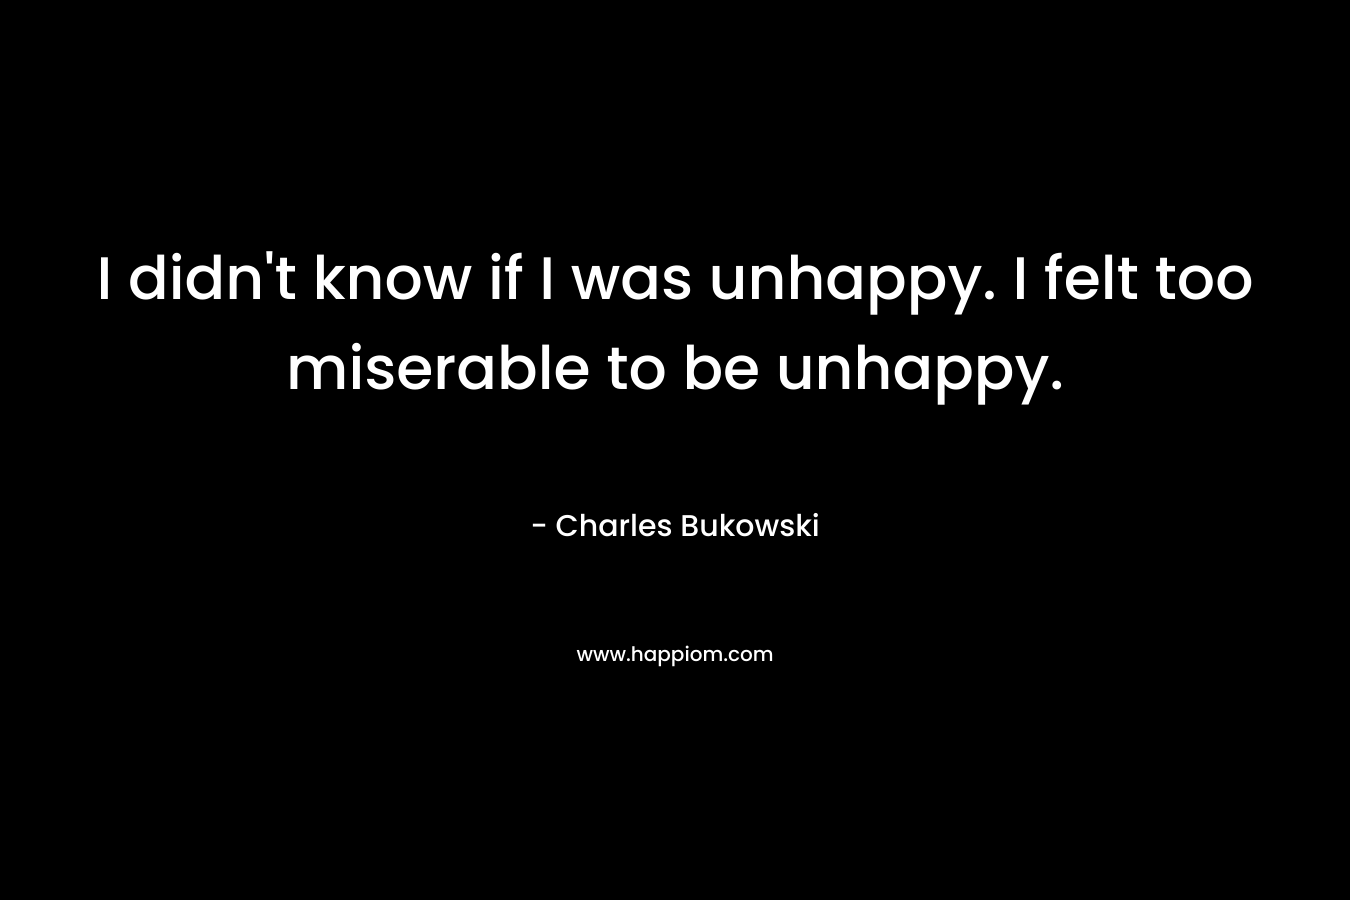 I didn't know if I was unhappy. I felt too miserable to be unhappy.